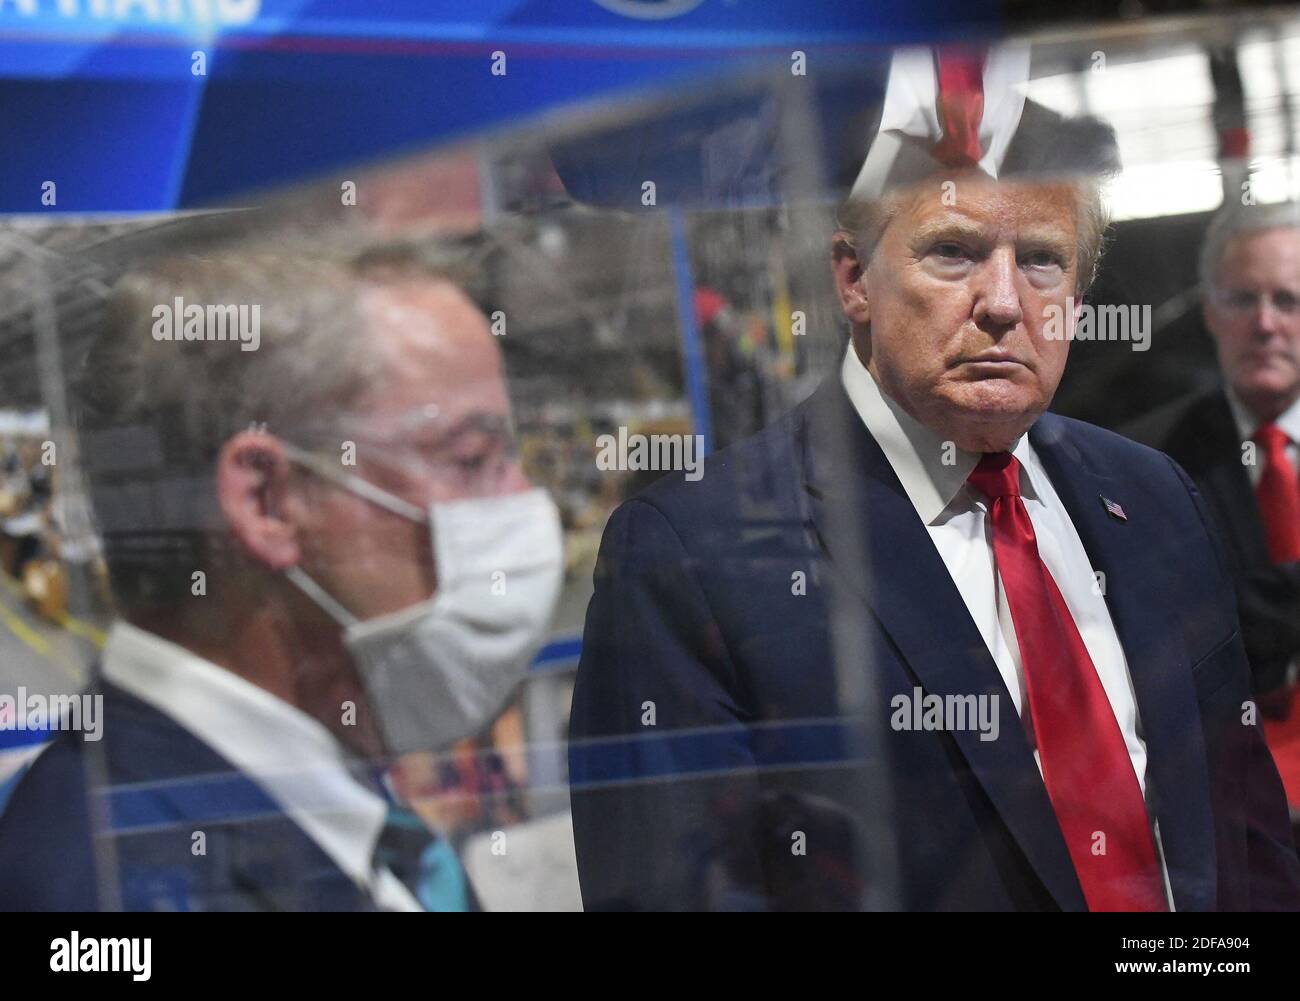 NO FILM, NO VIDEO, NO TV, NO DOCUMENTARY - Executive Chairman of Ford Motor Company Bill Ford Jr., left, and President Donald Trump during a tour of Ford Motor Co.'s Rawsonville Components Plant in Ypsilanti, MI, USA on Thursday, May 21, 2020. Trump says he wore a mask in a 'back area' during a factory tour in Michigan, but removed it before facing the cameras. He told reporters he took off the facial covering at the Ford car plant because he 'didn't want to give the press the pleasure of seeing it', and he was about to make a speech. Photo by Daniel Mears/The Detroit News/TNS/ABACAPRESS.COM Stock Photo